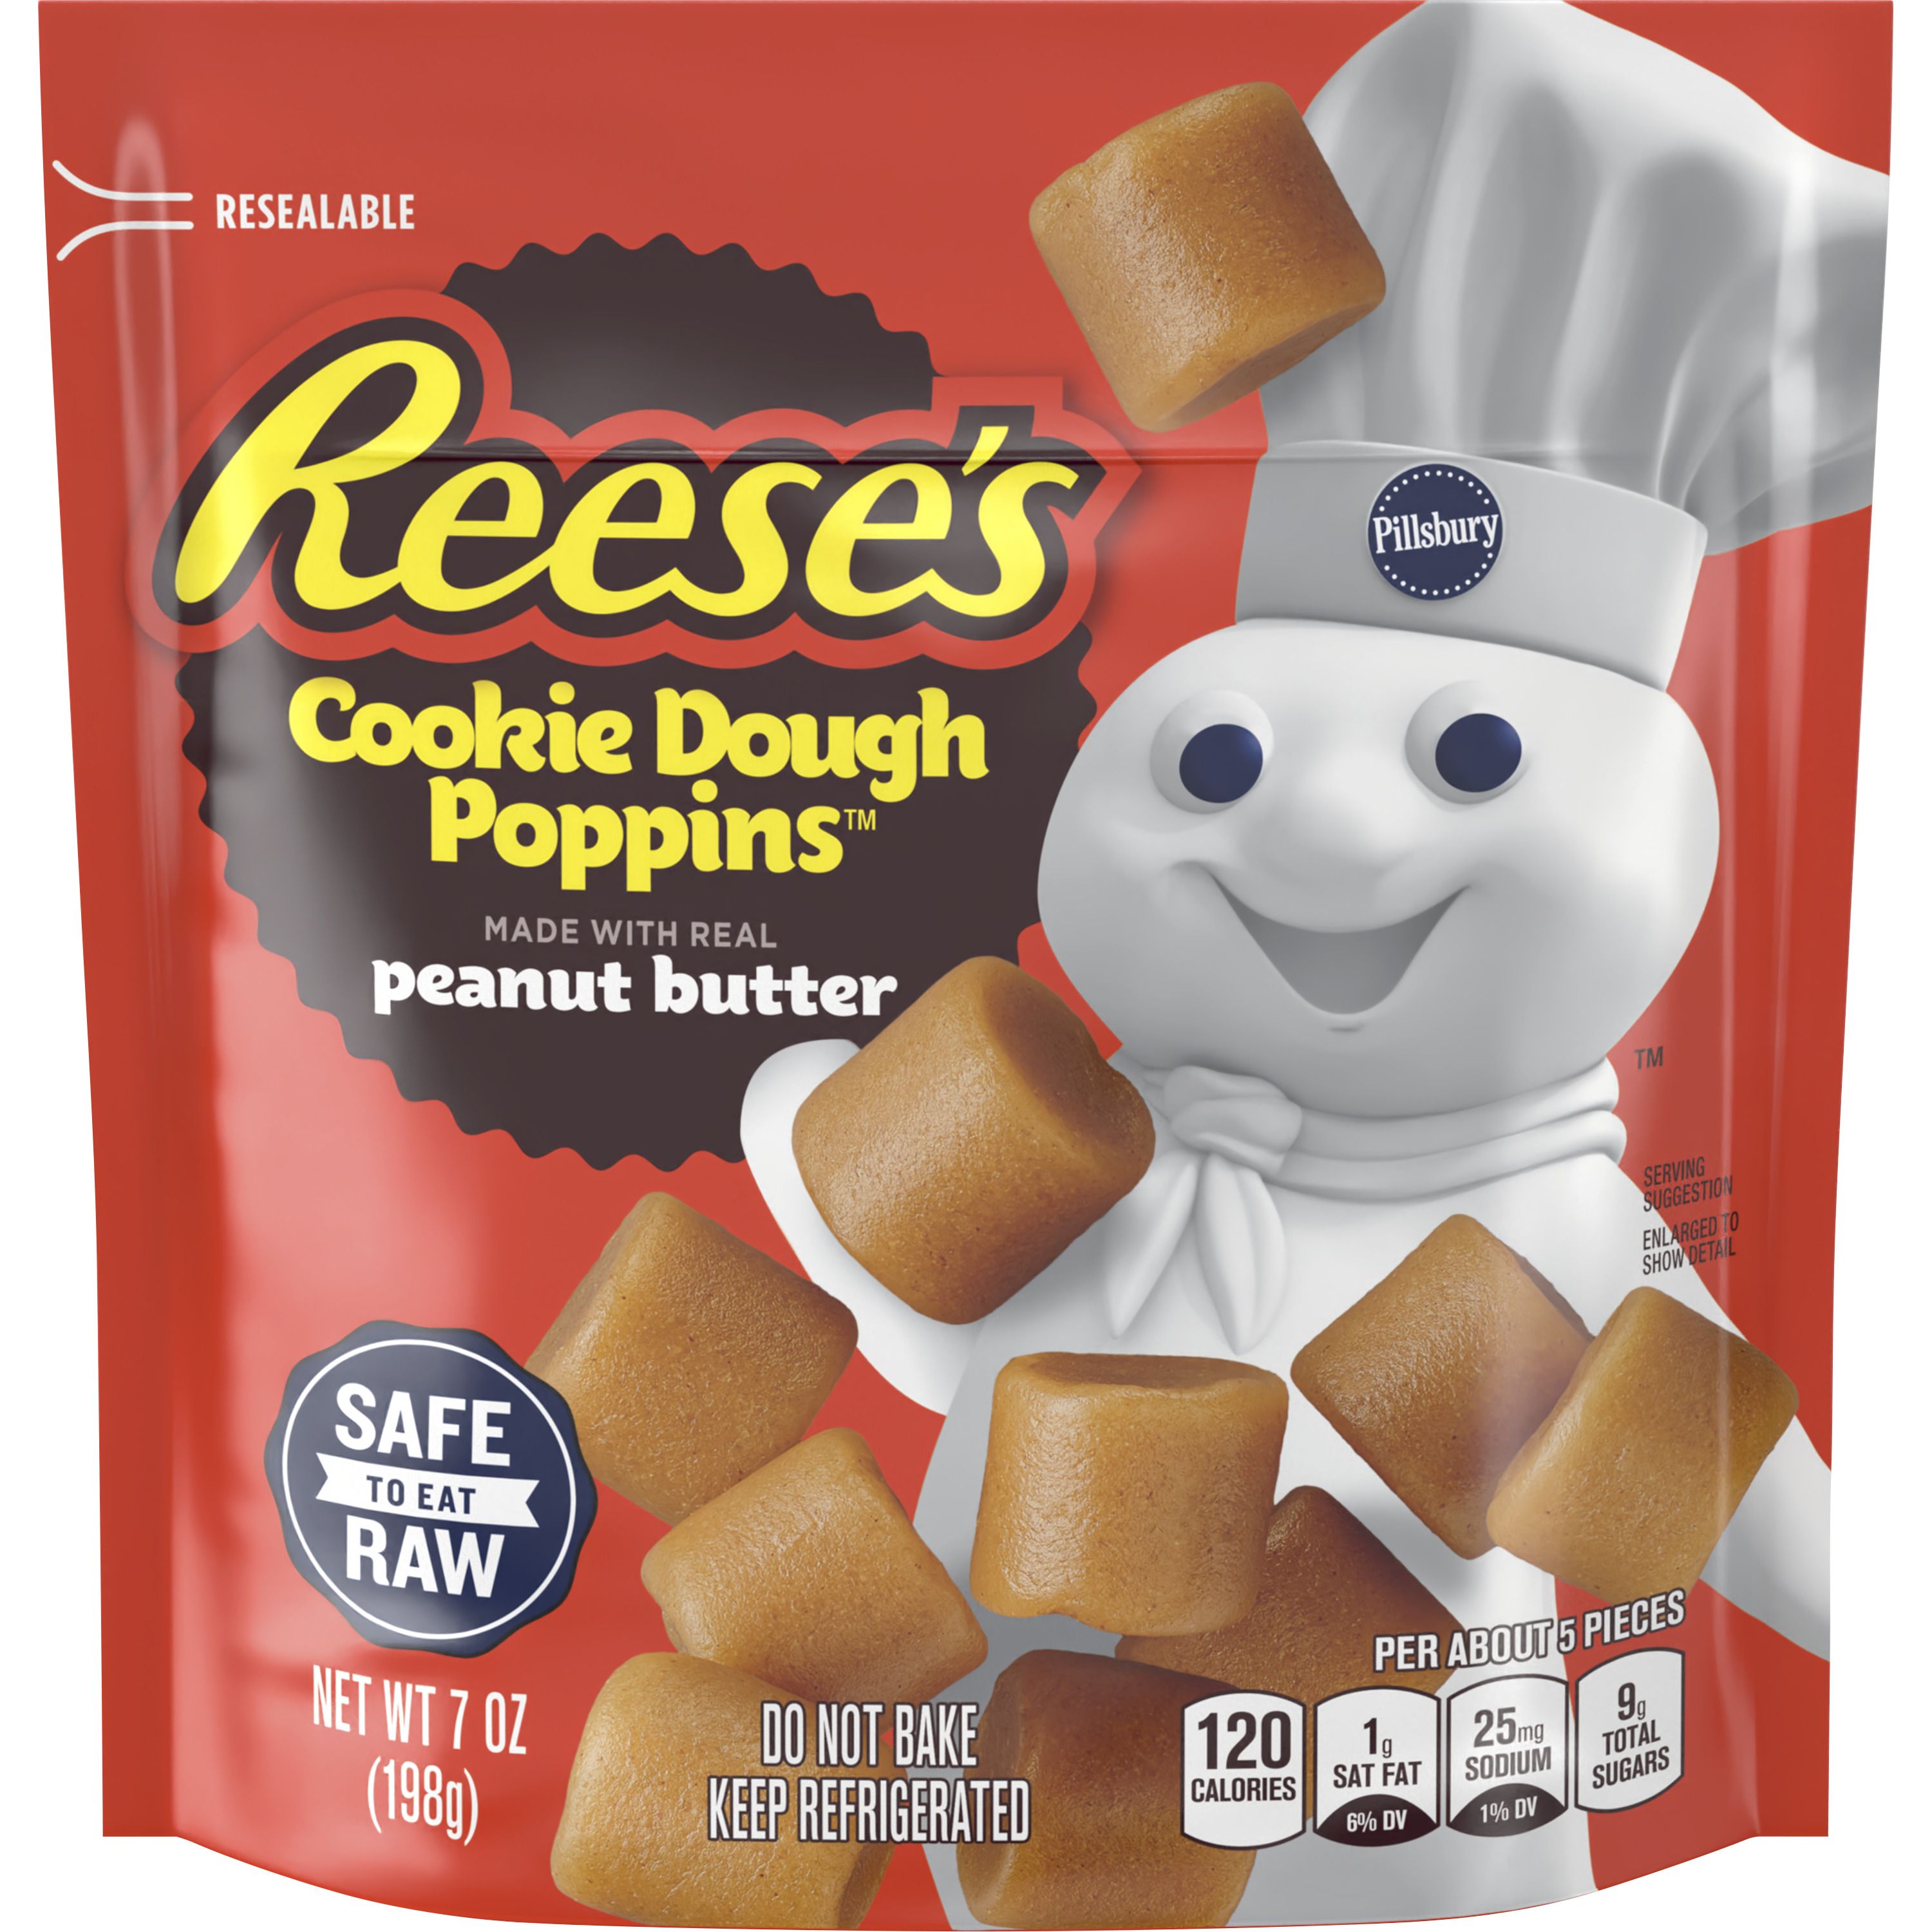 Pillsbury Reese's Peanut Butter Cookie Dough Poppins, Made With Real Peanut Butter, 7 oz. - Front